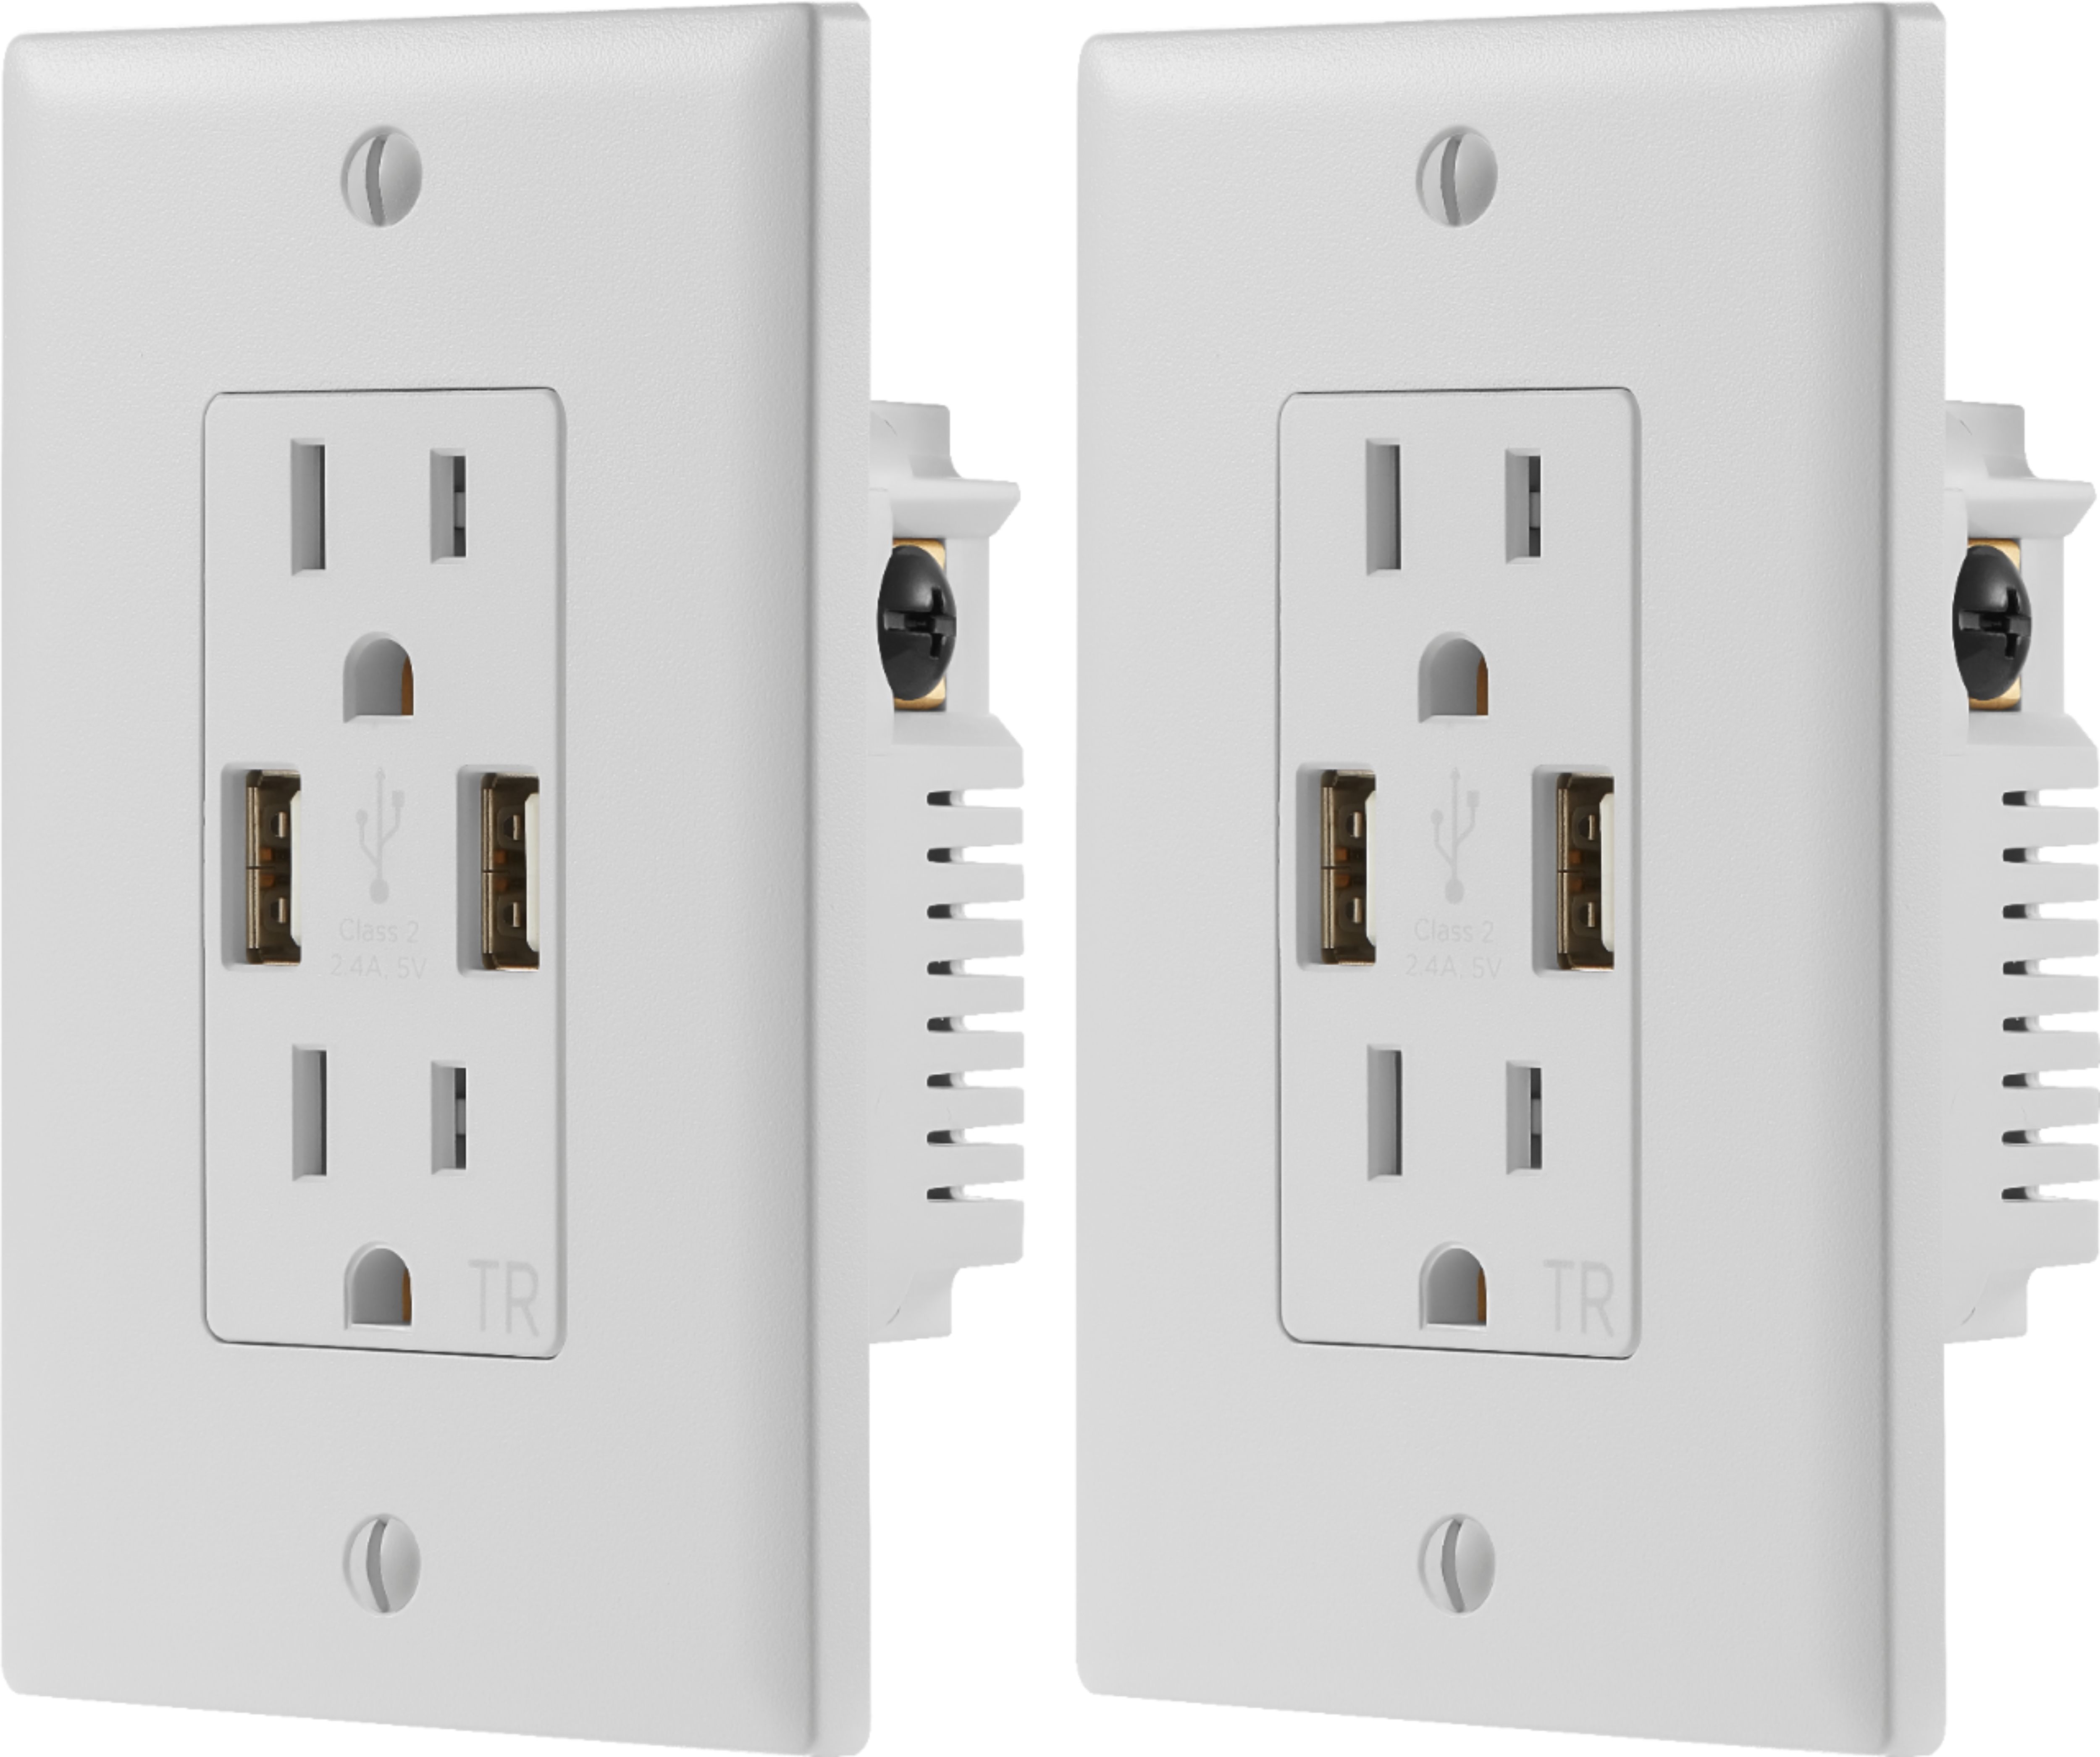 Dynex™ - 2.4A USB Wall Outlet (2-Pack) - White